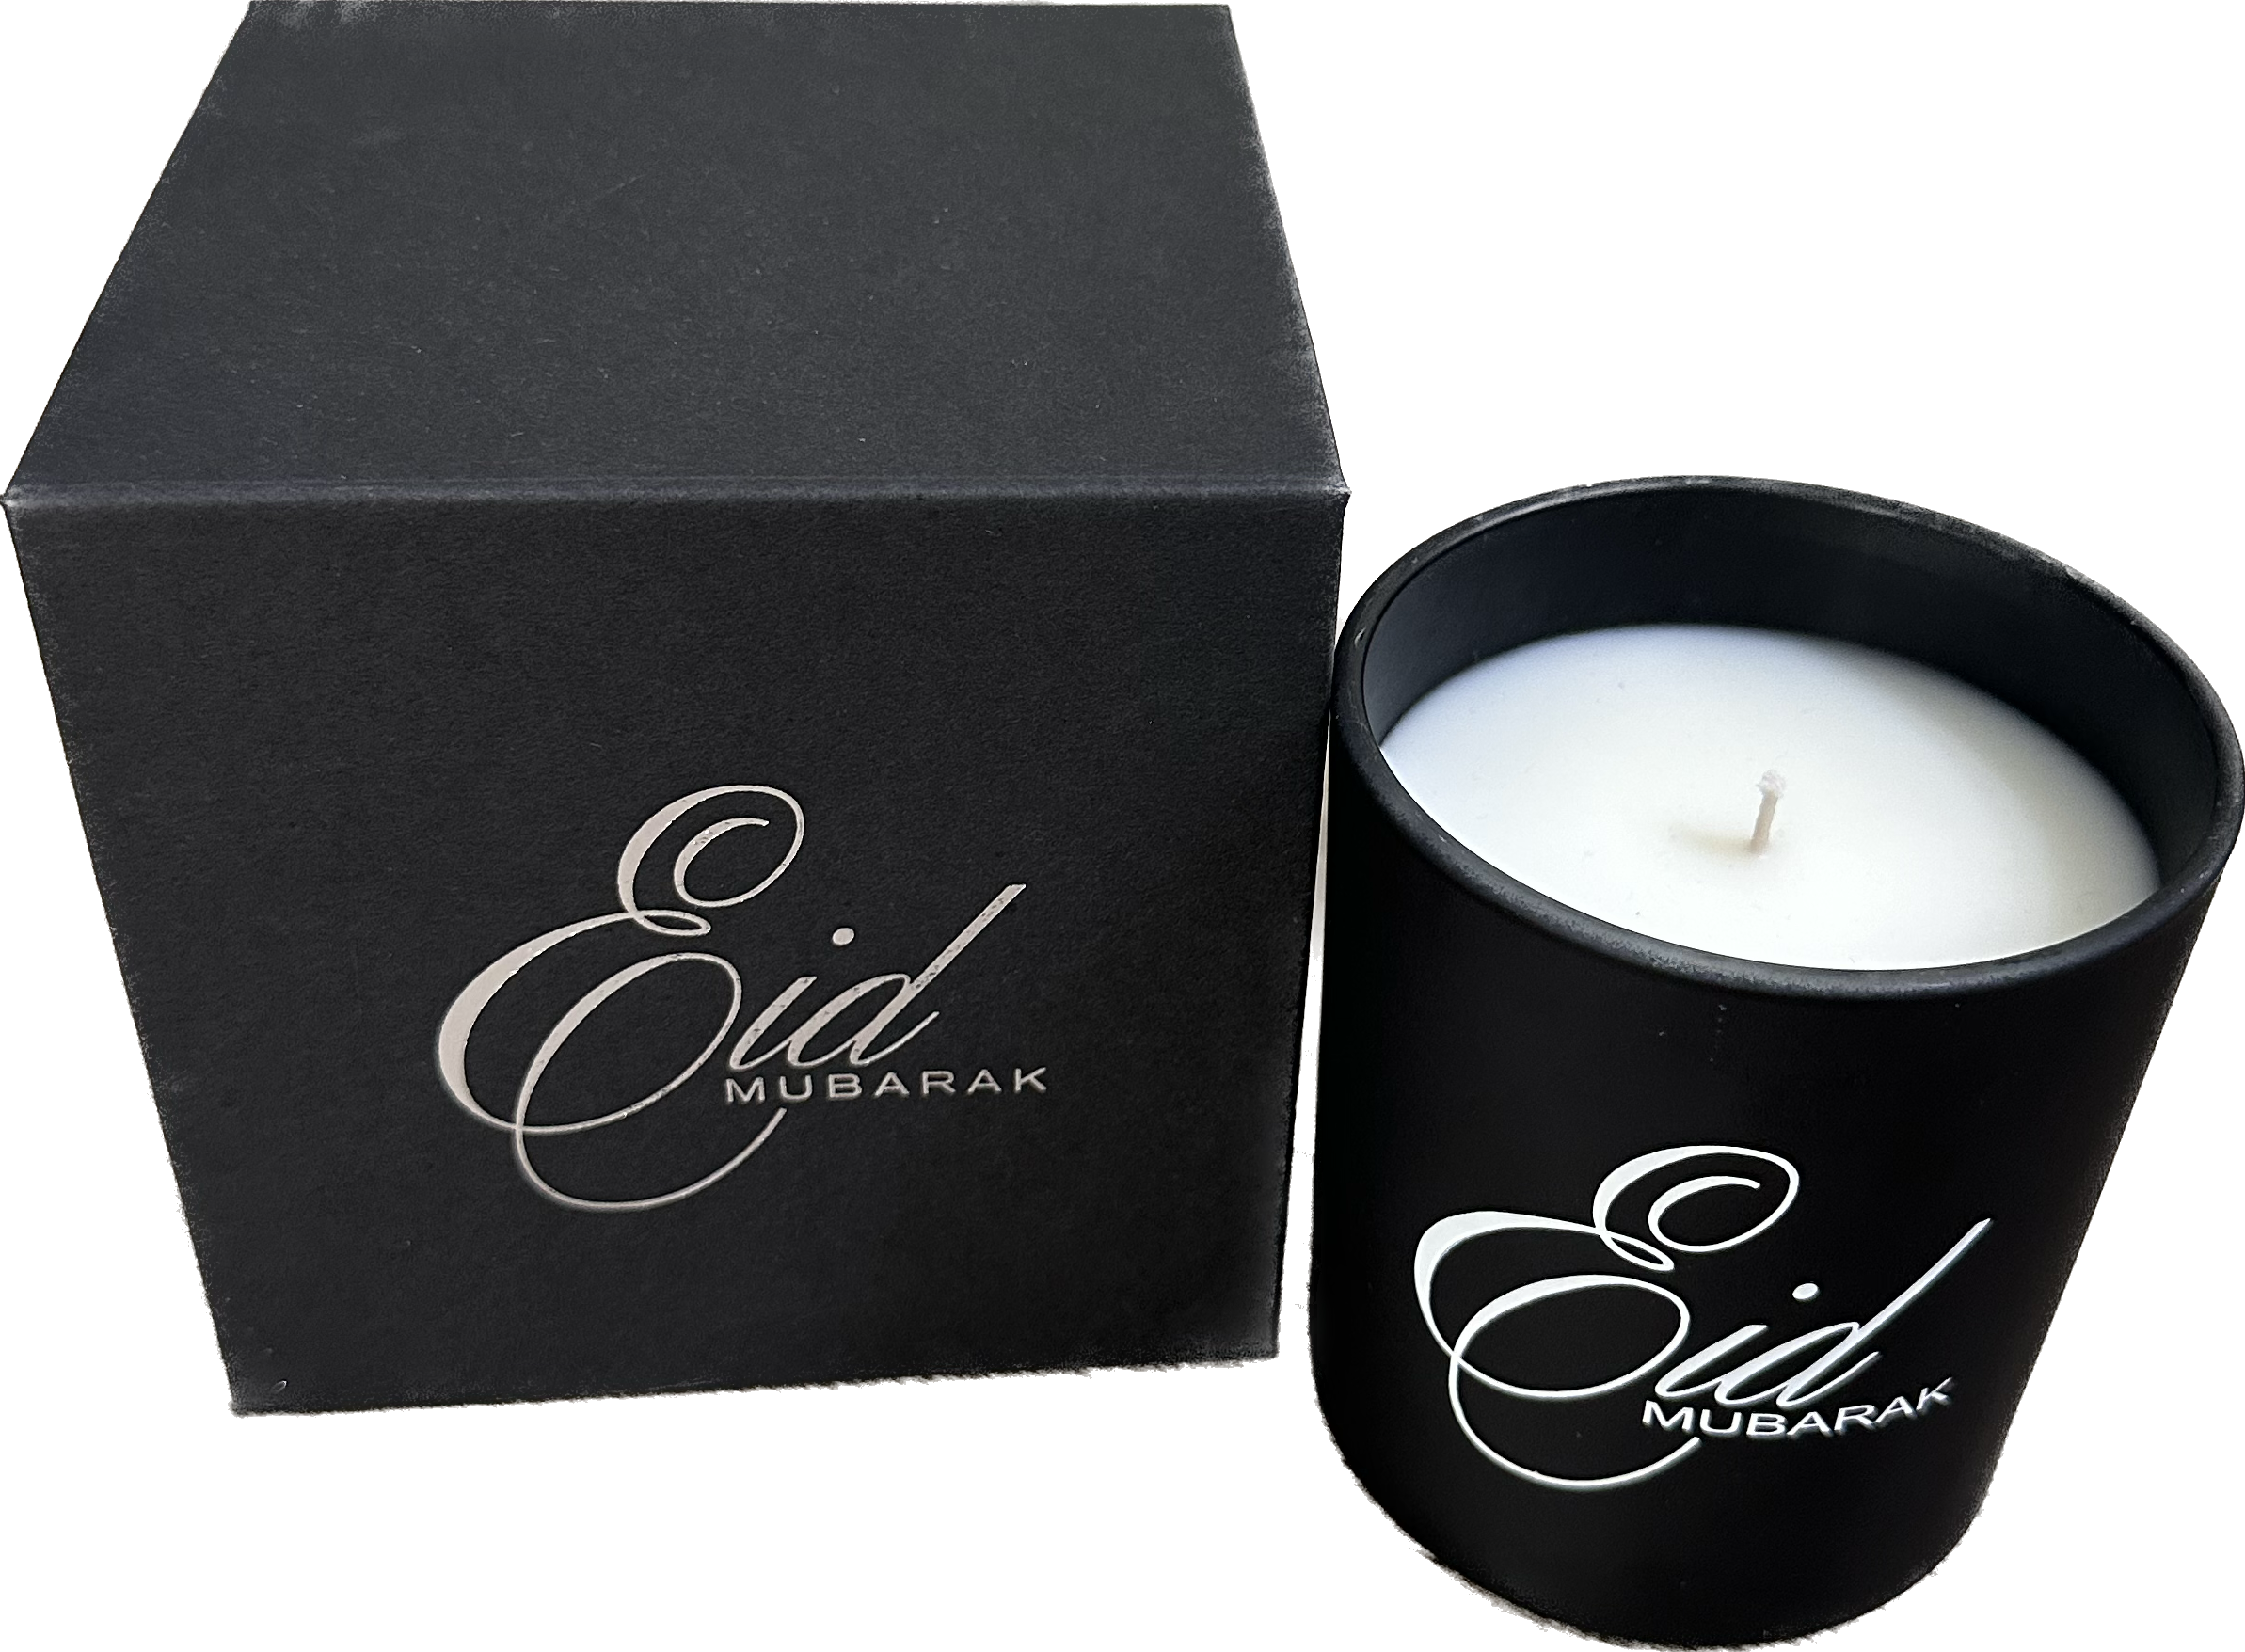 Special Eid Mubarak Soy Wax Candle with screen print